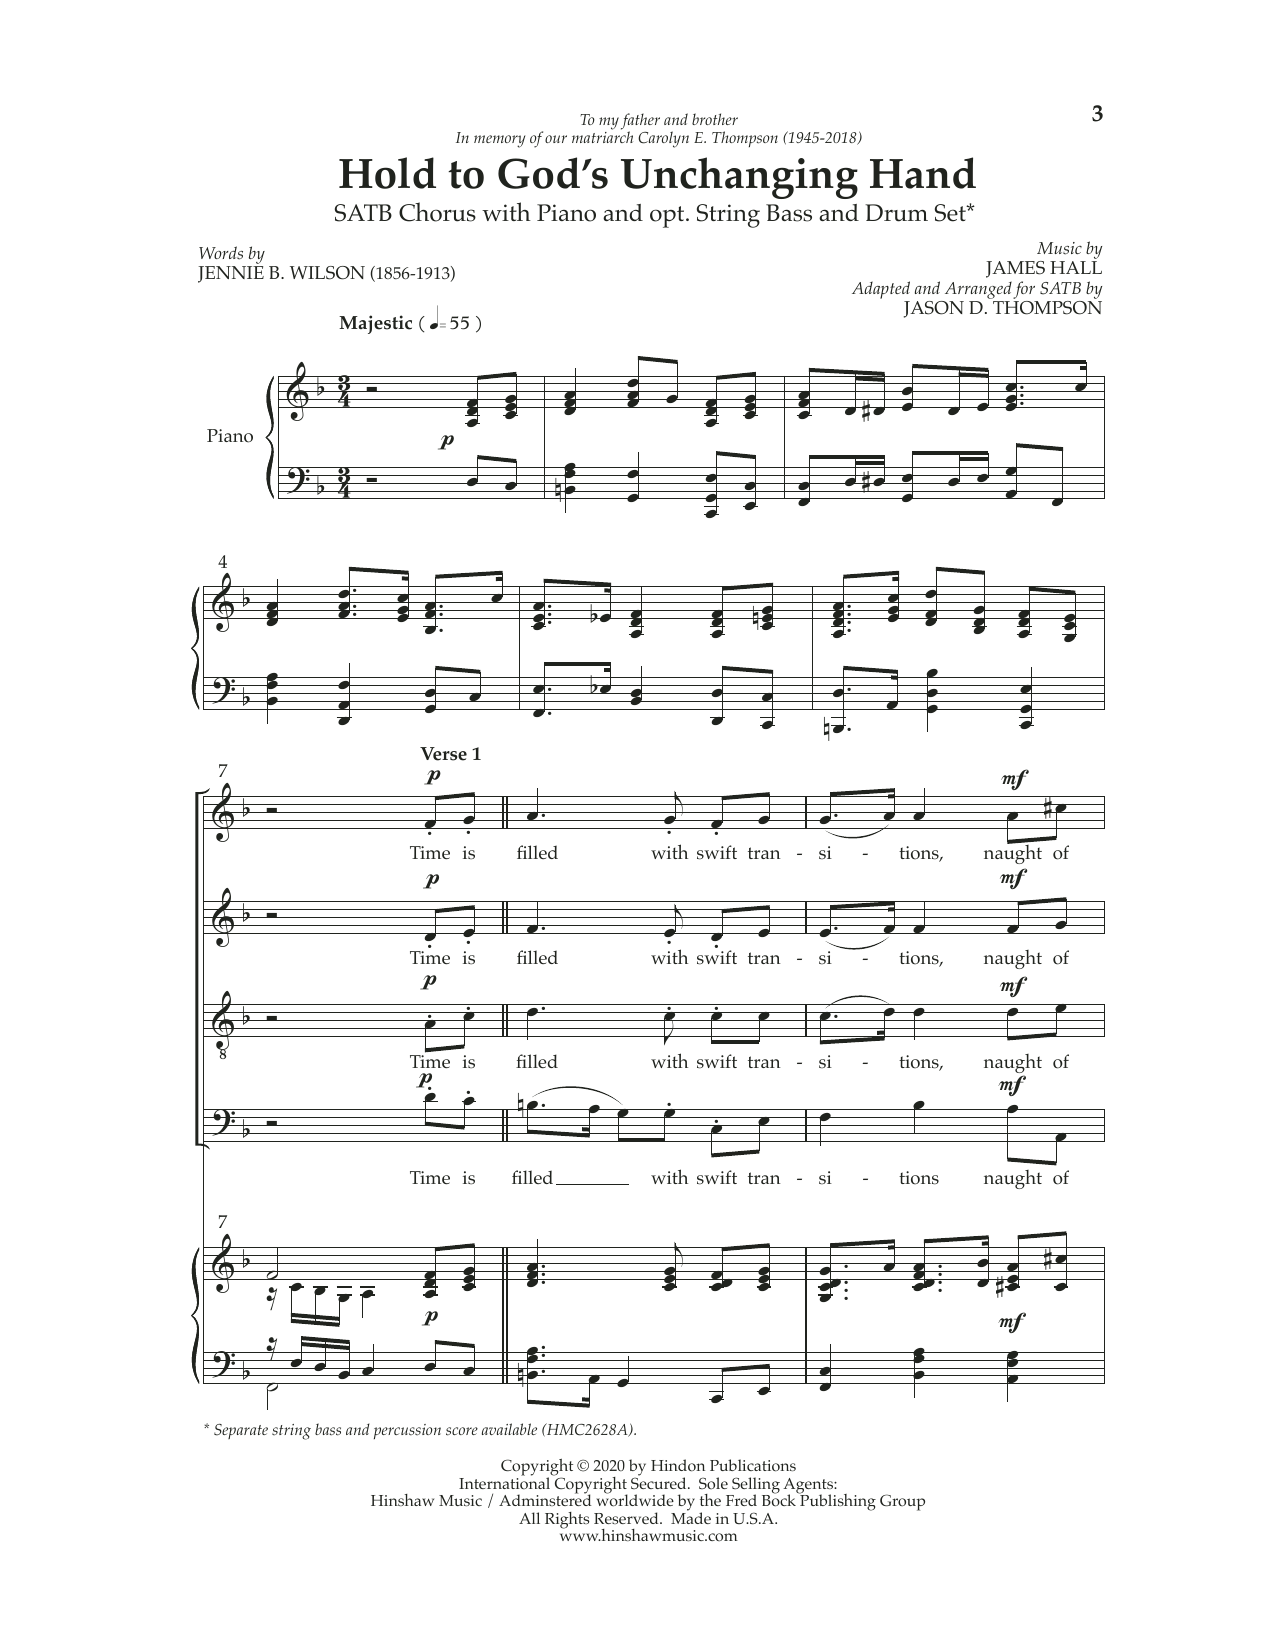 Download Jason D. Thompson Hold To God's Unchanging Hands Sheet Music